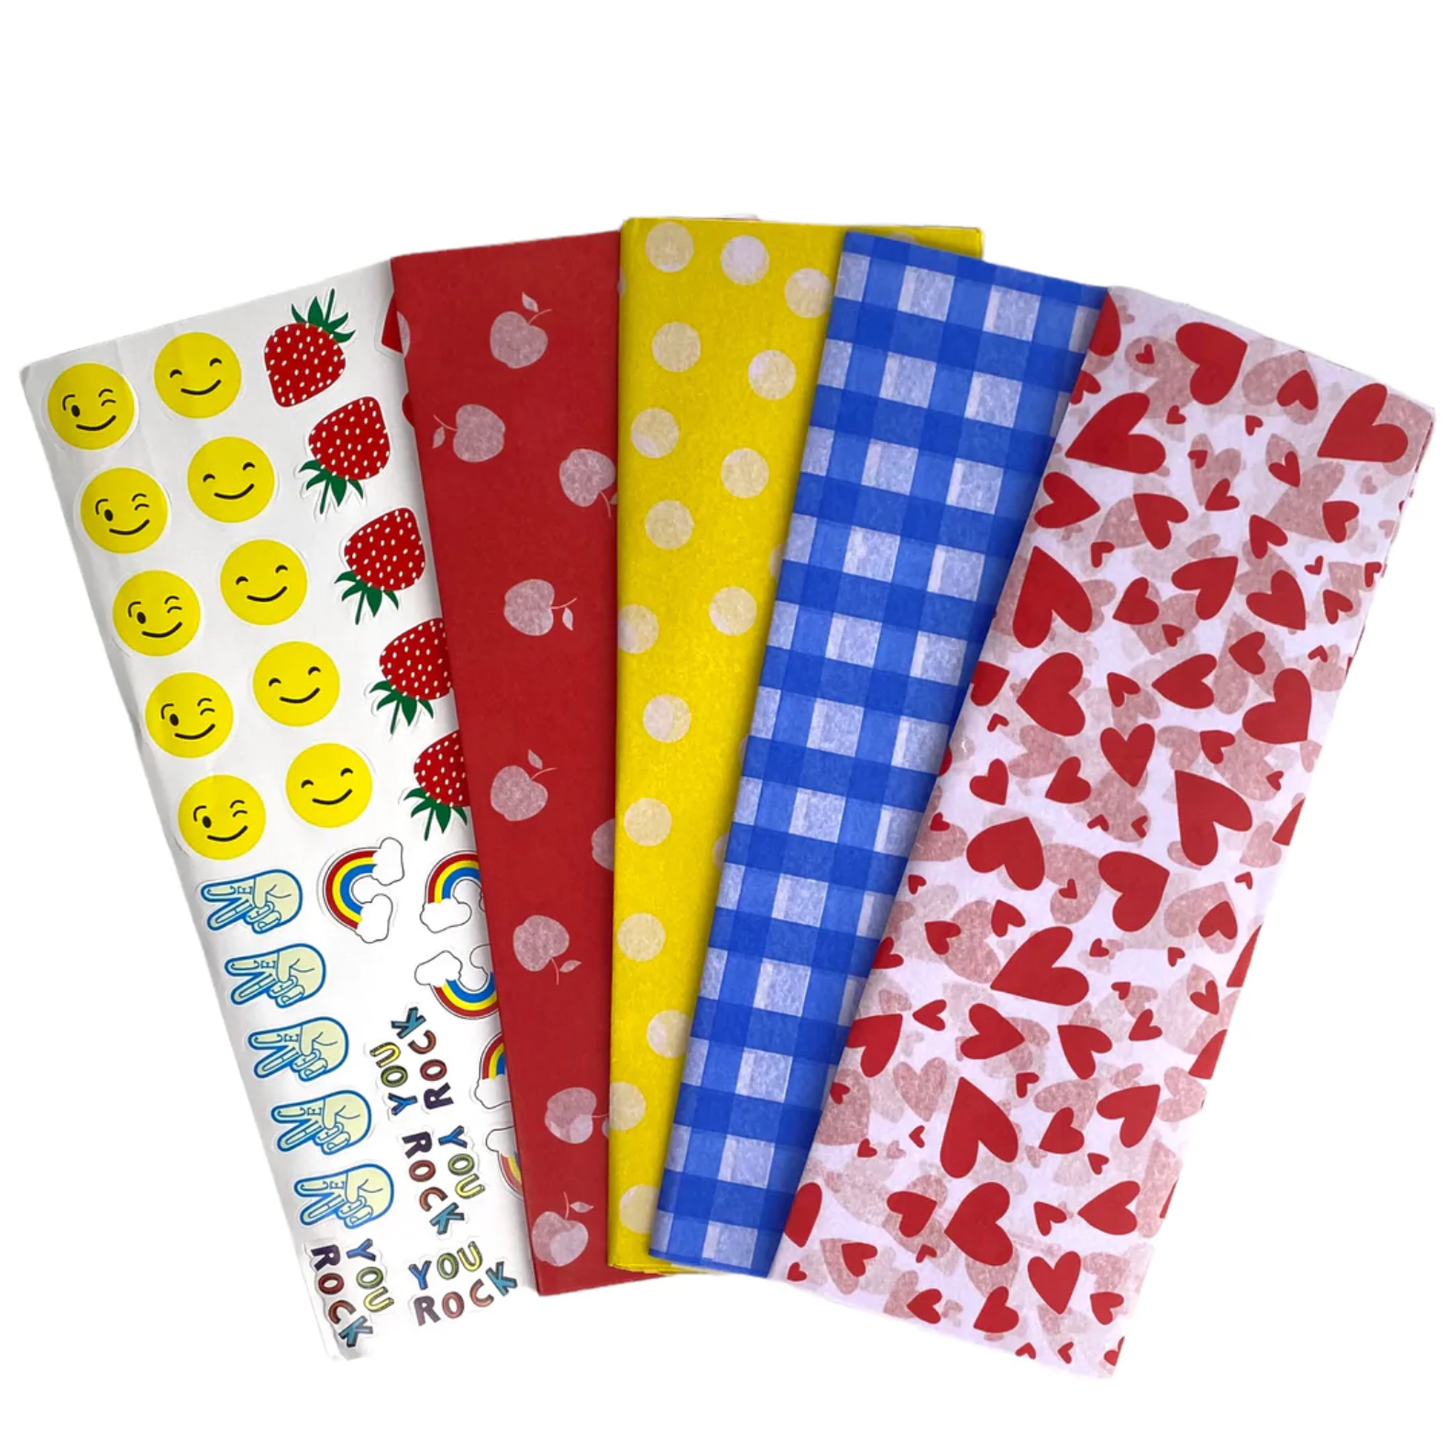 Fun prints sandwich wrapping papers and stickers. white apples on red paper, white dots on yellow, blue and white checkers, red hears on  white plus 40 fun stickers